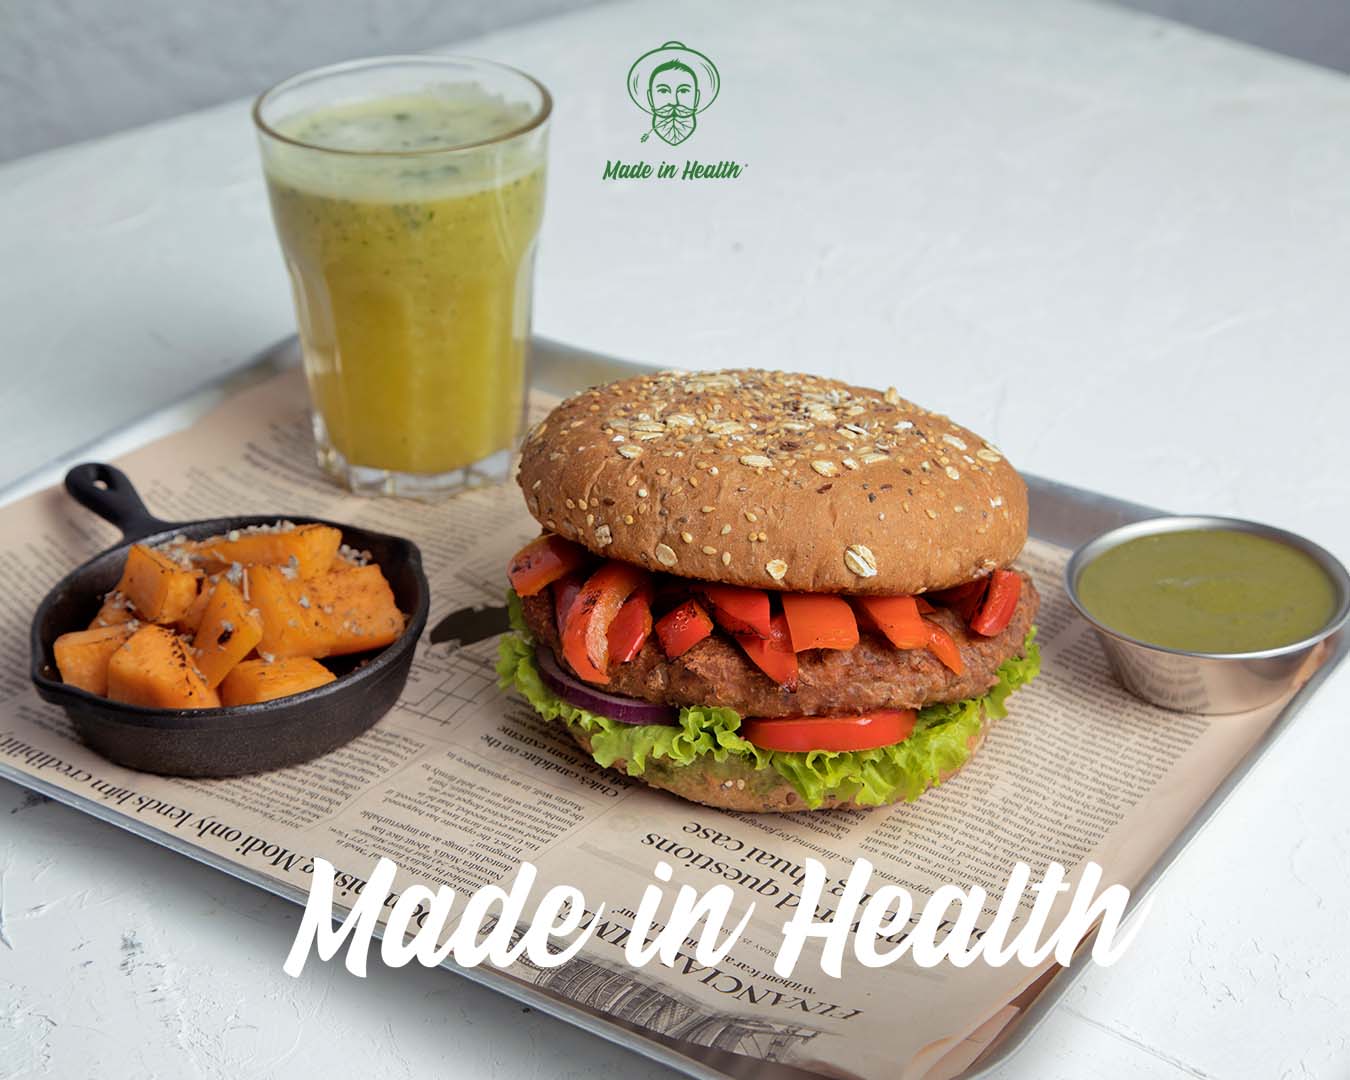 Made in Health Burger